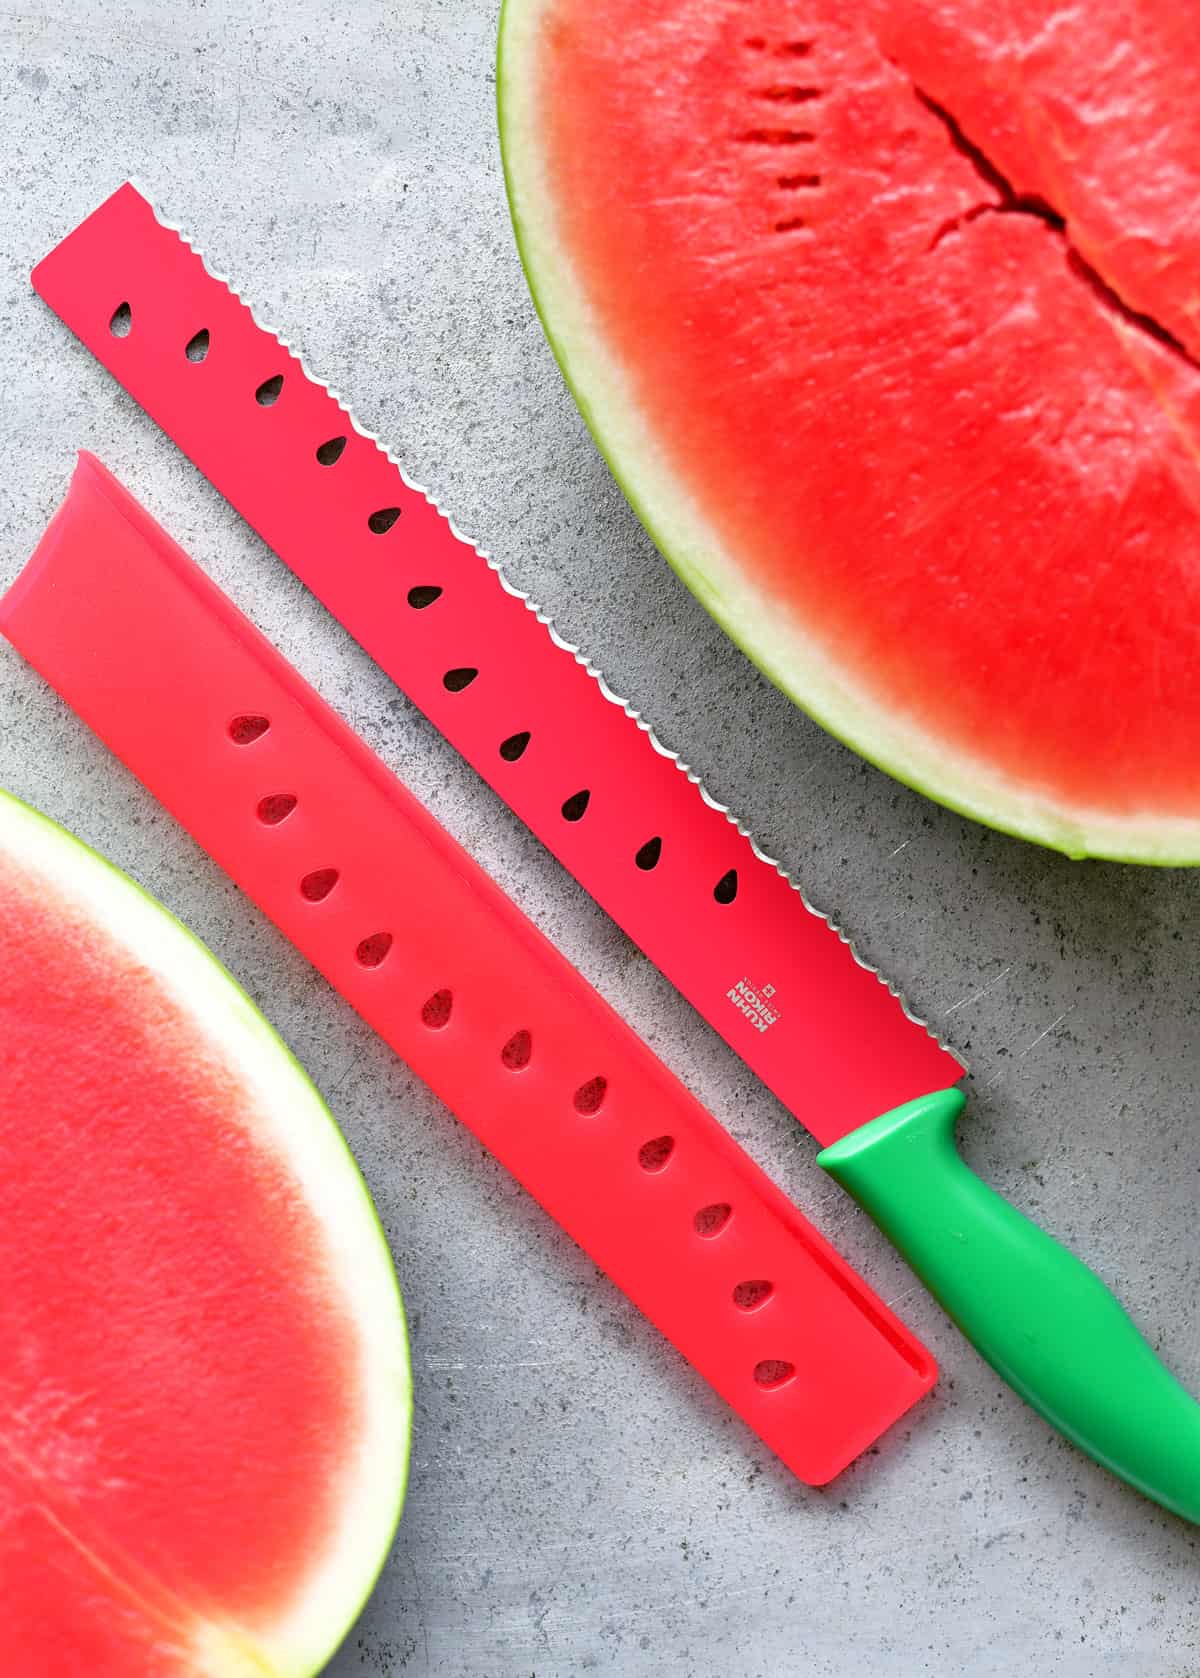 A watermelon knife with two watermelon halves.